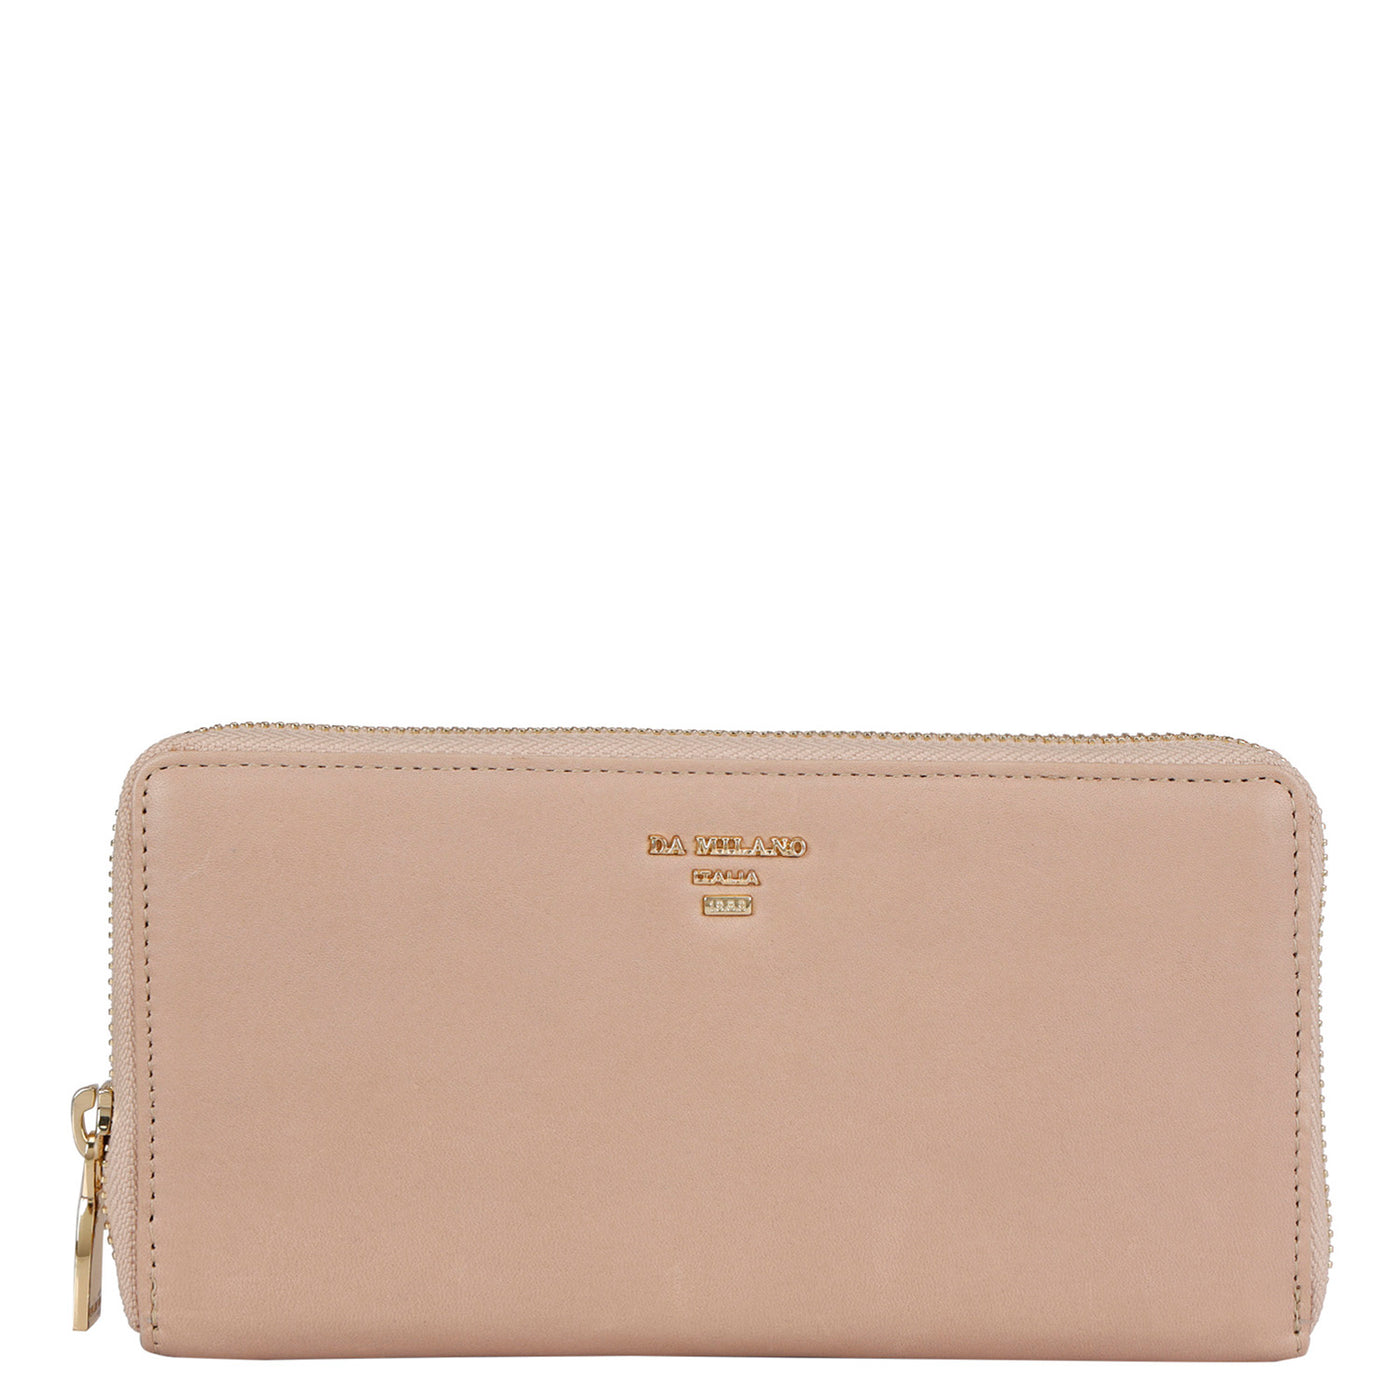 Plain Leather Ladies Wallet - Taupe